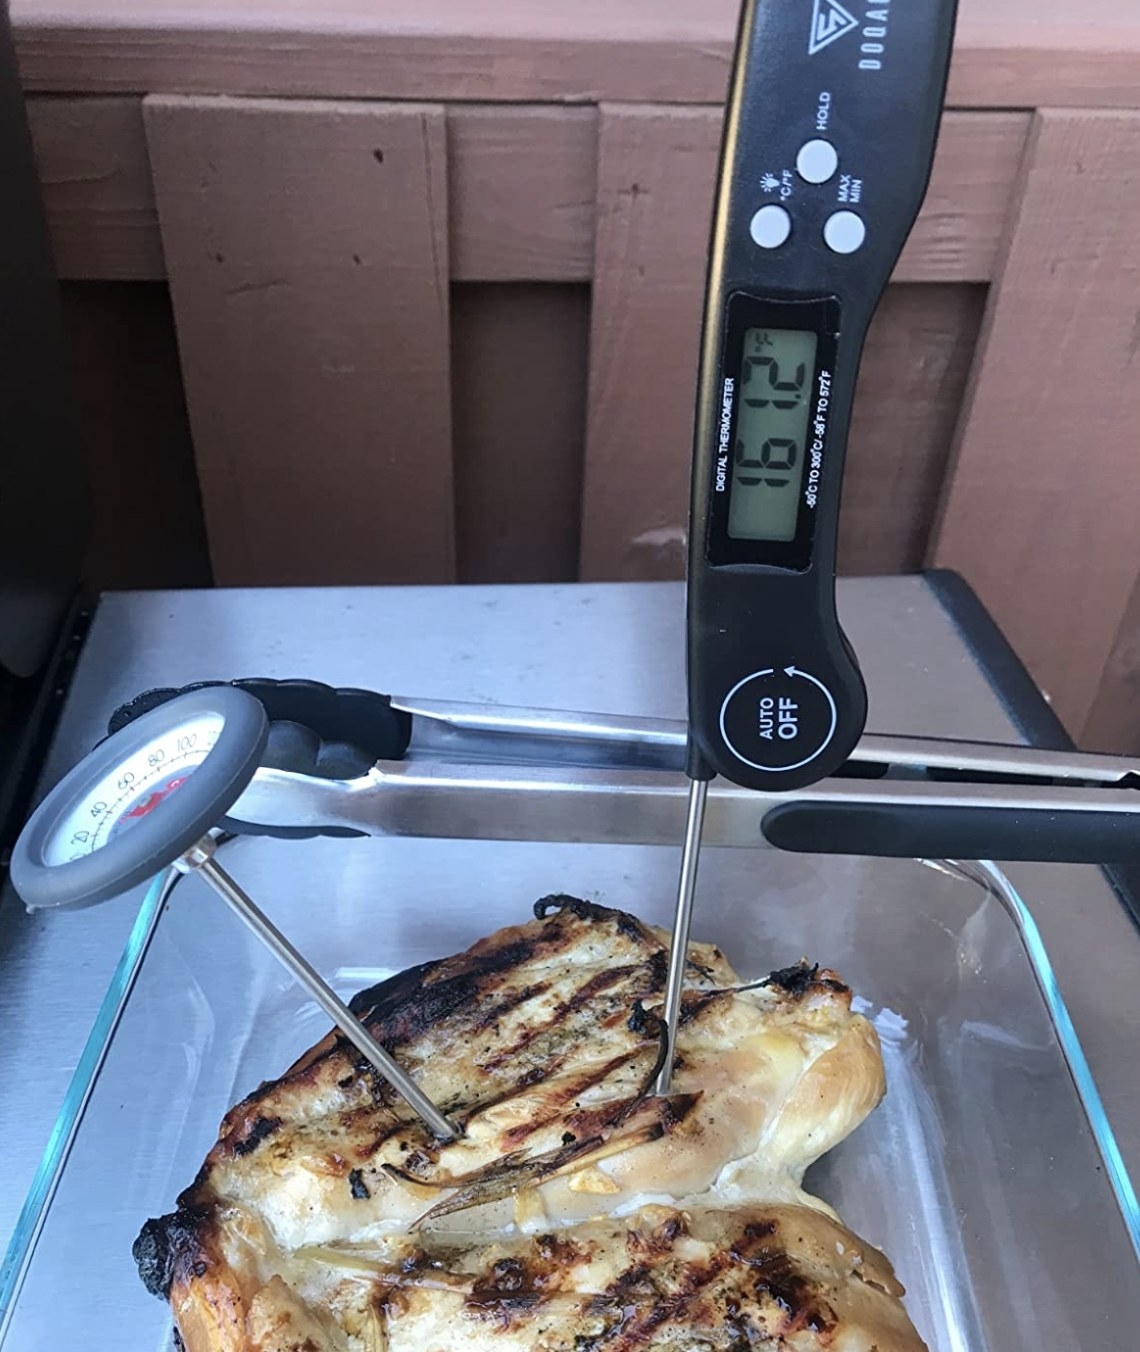 a digital food thermometer measuring the temperature of a piece of meat